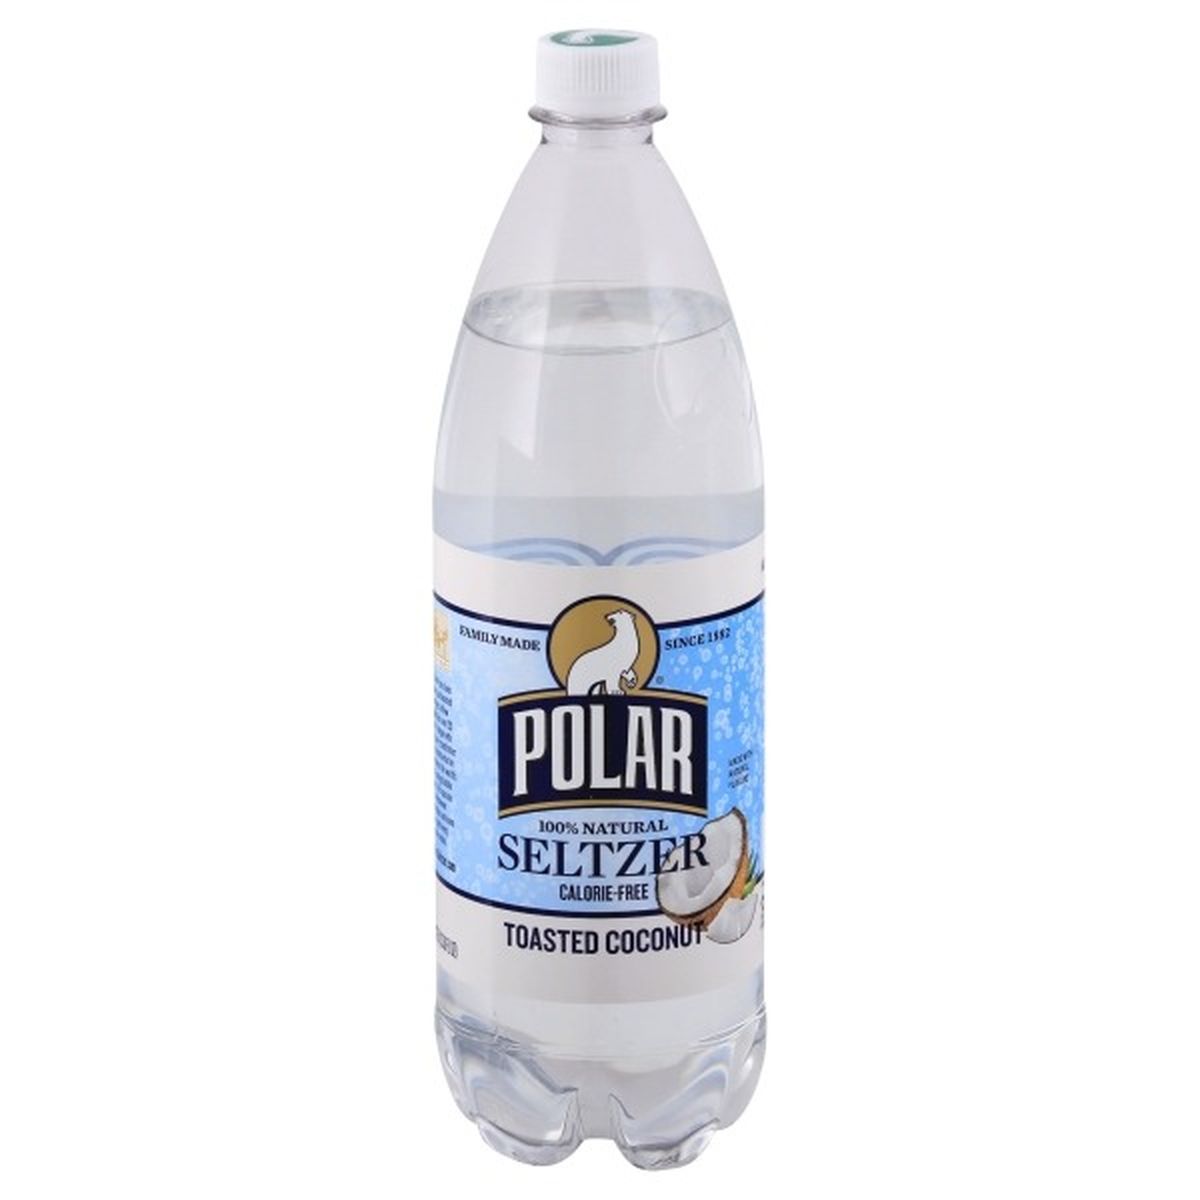 Calories in Polar Seltzer, 100% Natural, Toasted Coconut